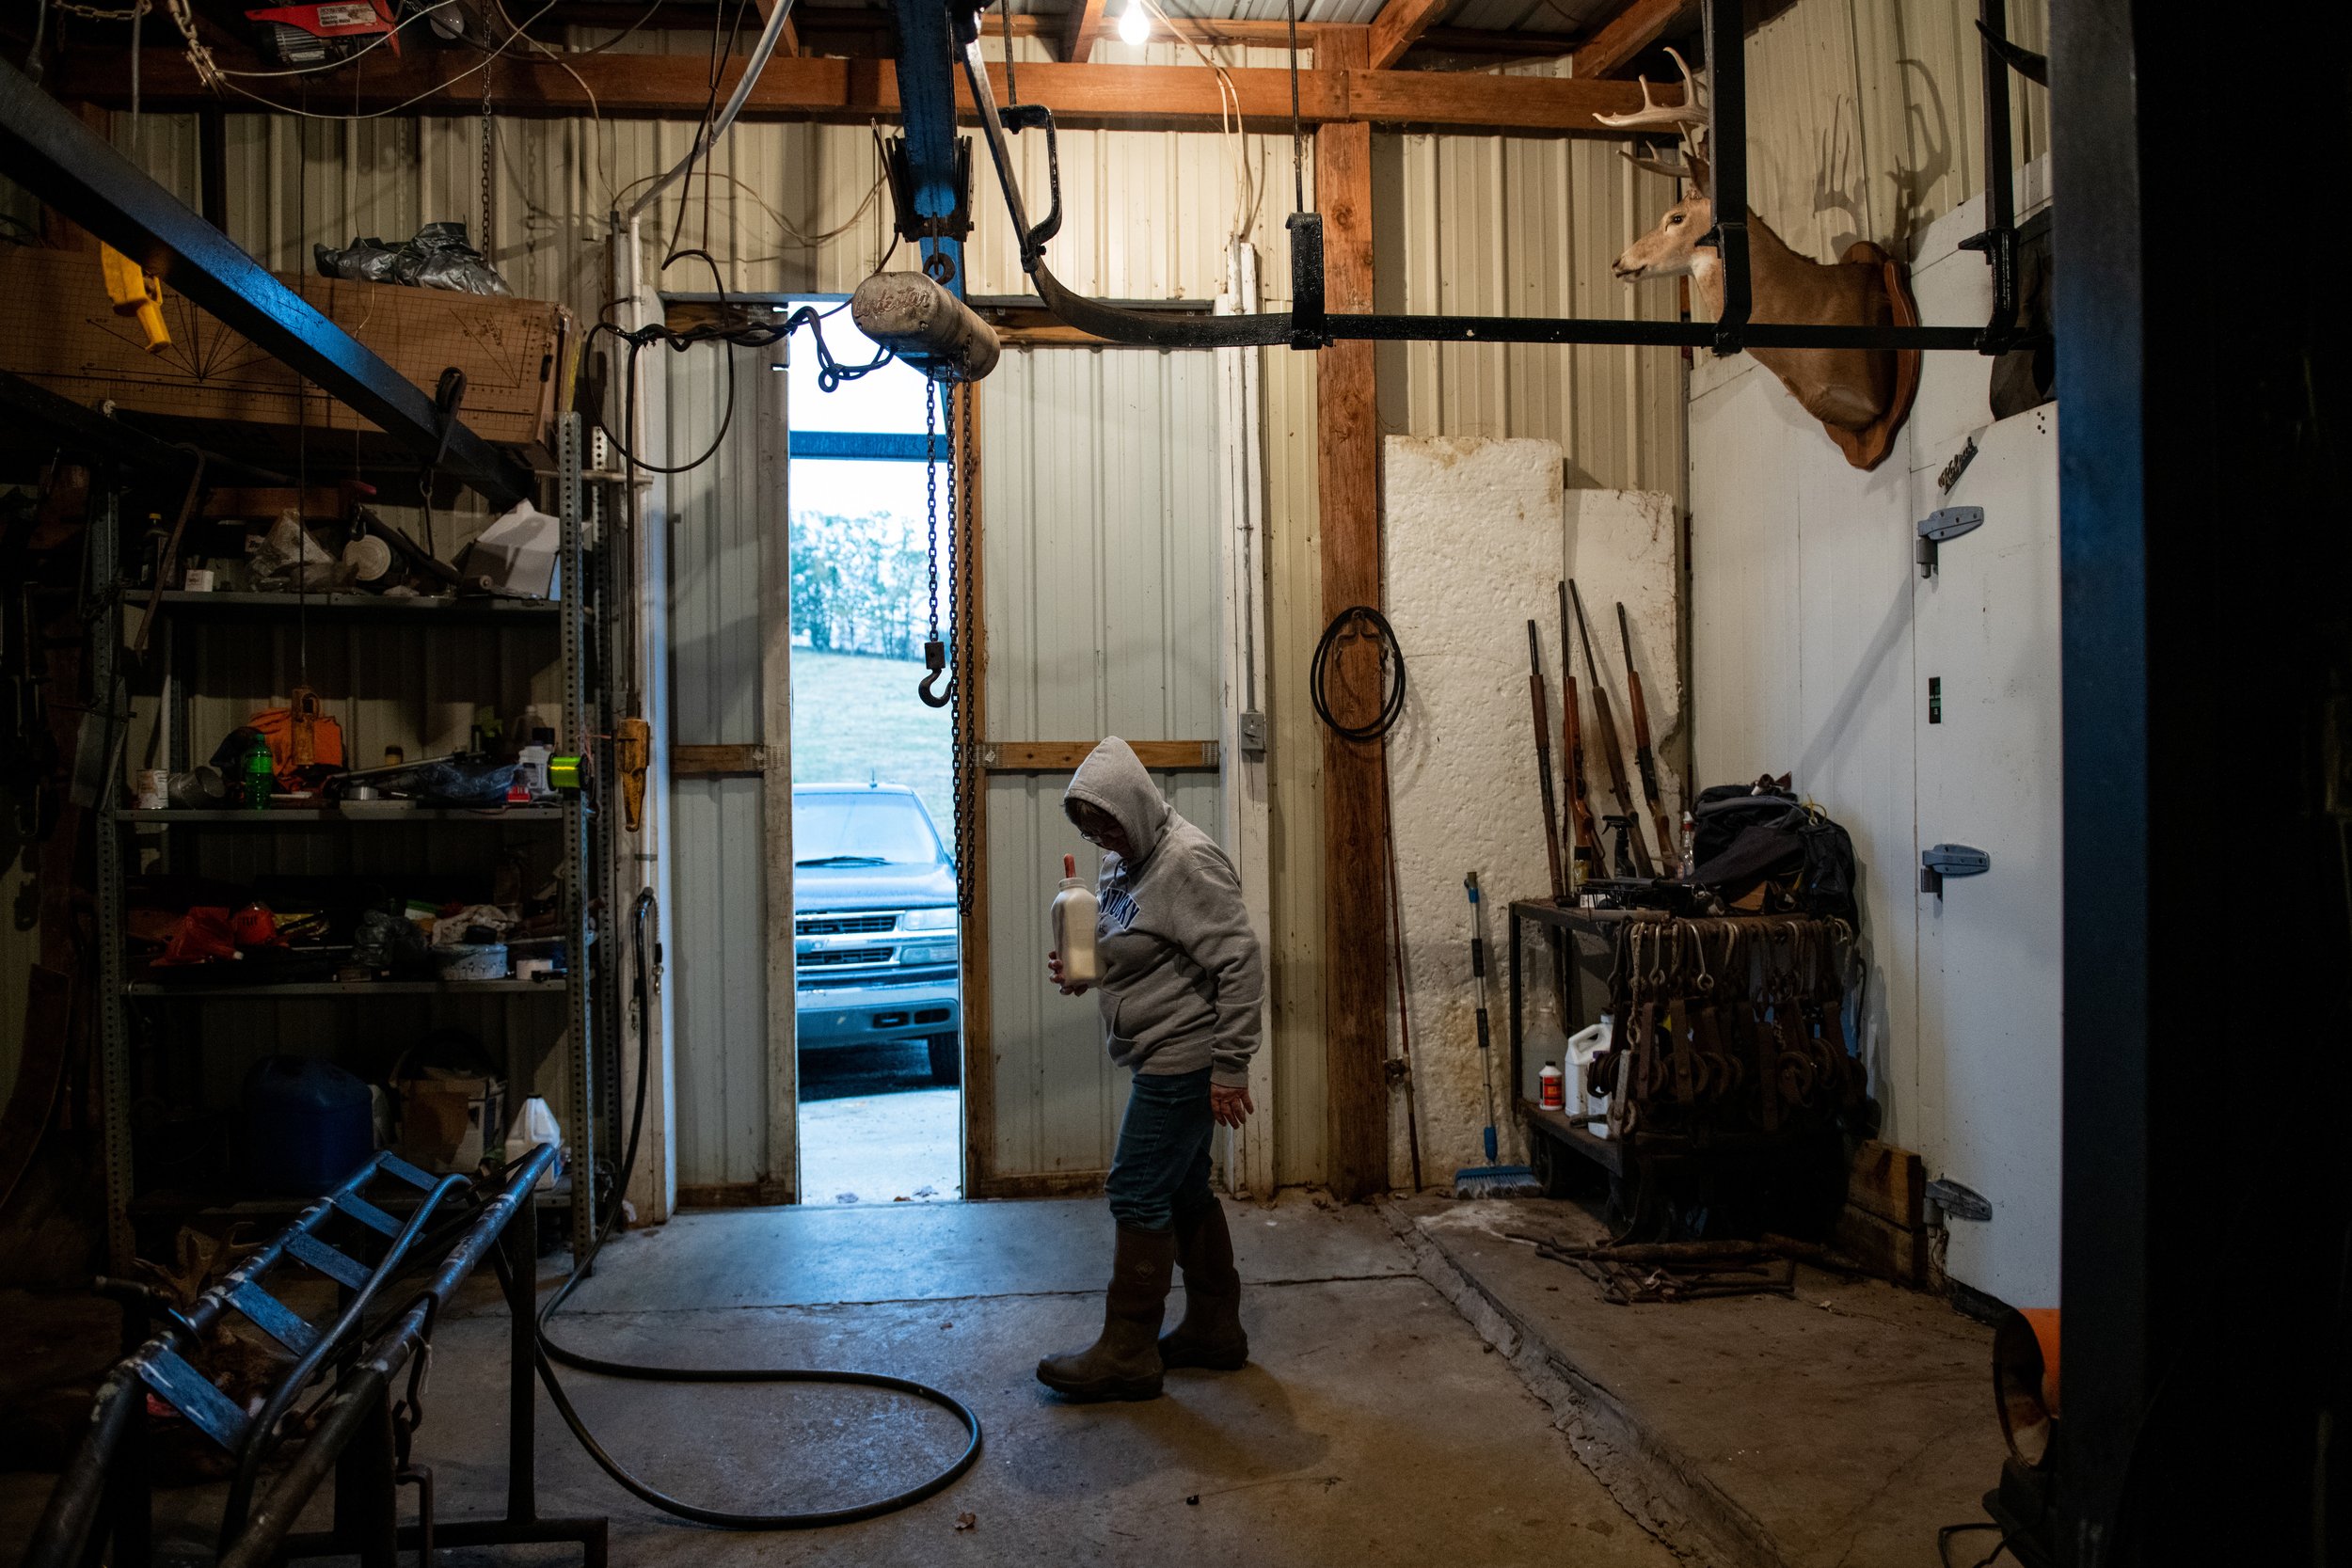   Judy Northcutt, a resident of Cynthiana, Ky., stands in her garage and gets ready to bottle-feed her calf at a nearby farm on October 31, 2019.  